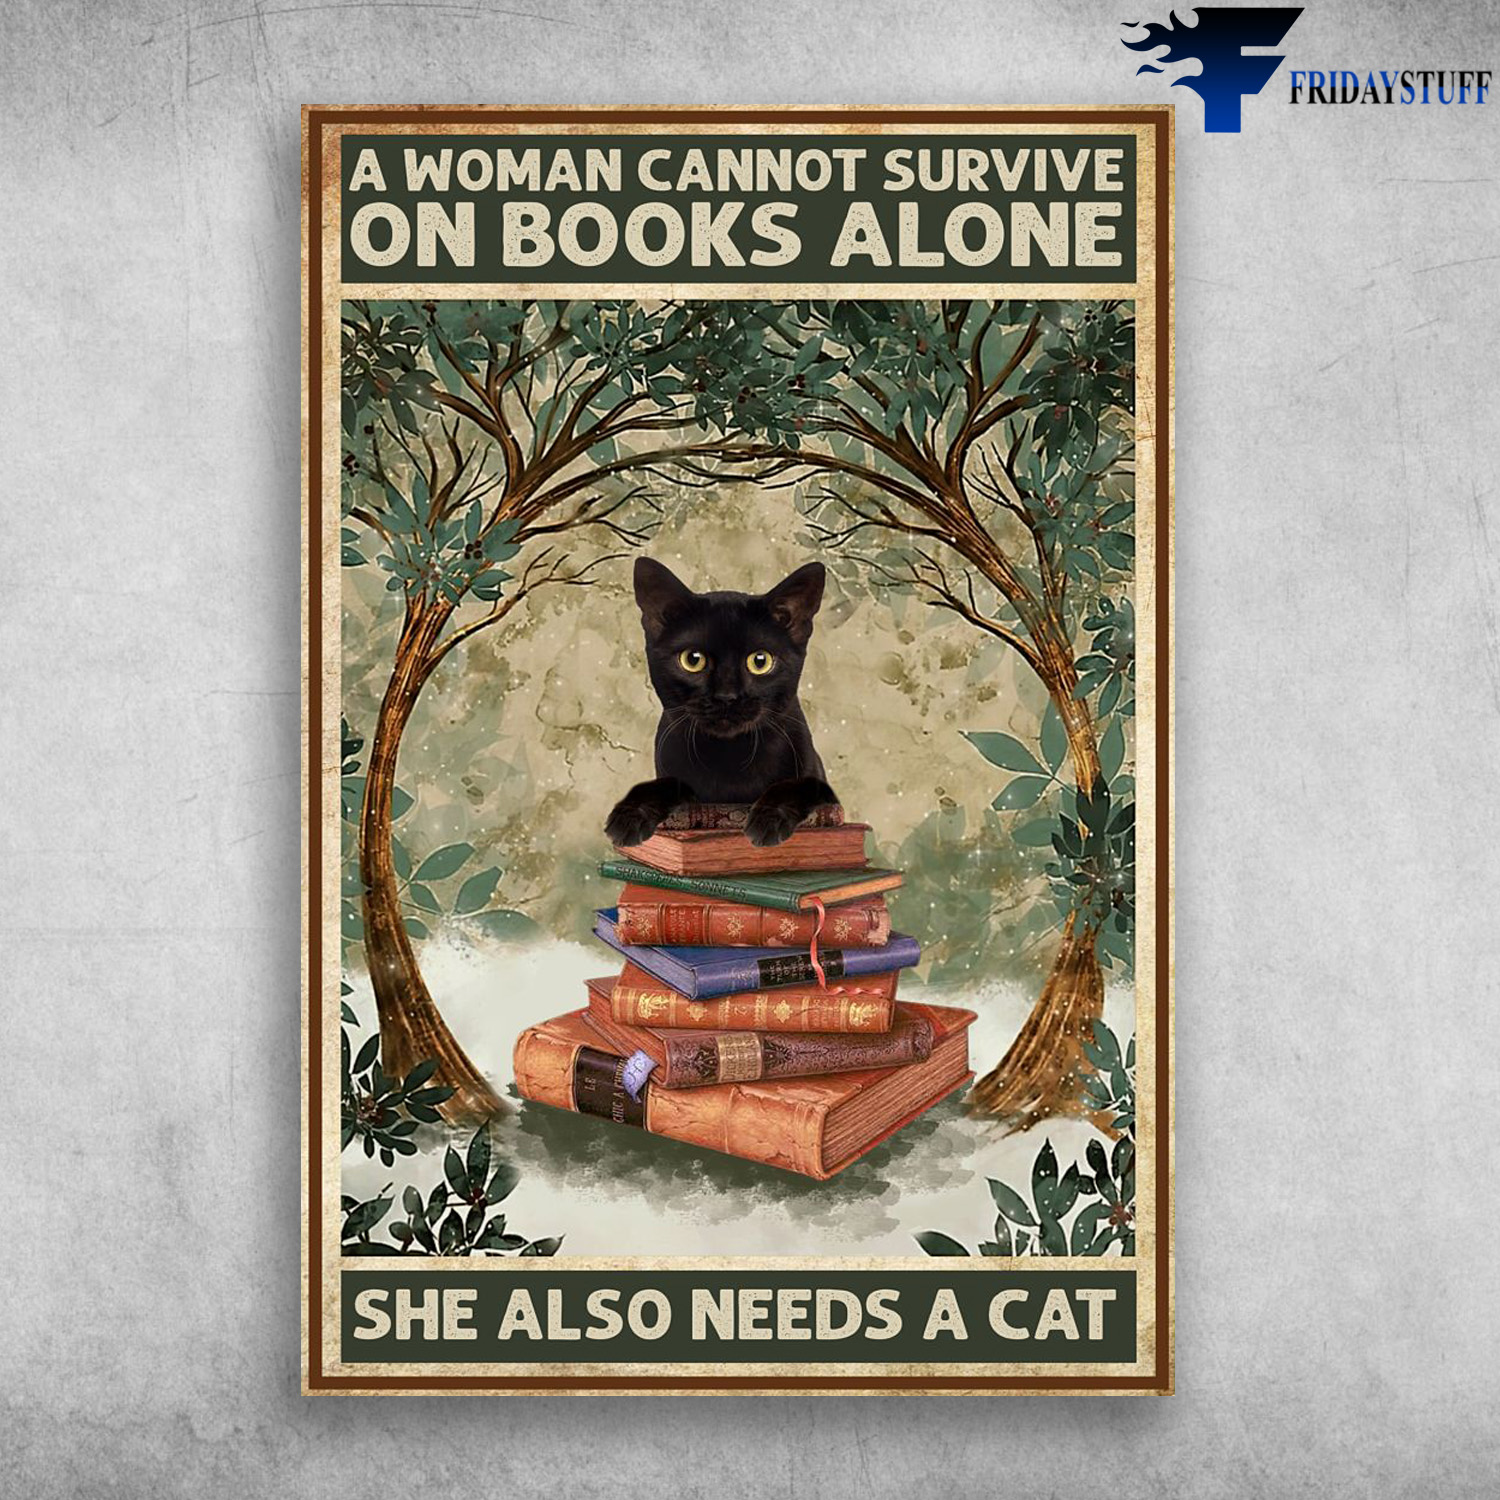 Black Cat And Book - A Woman Cannot Survive, On Books Alone, She Also Needs A Cat